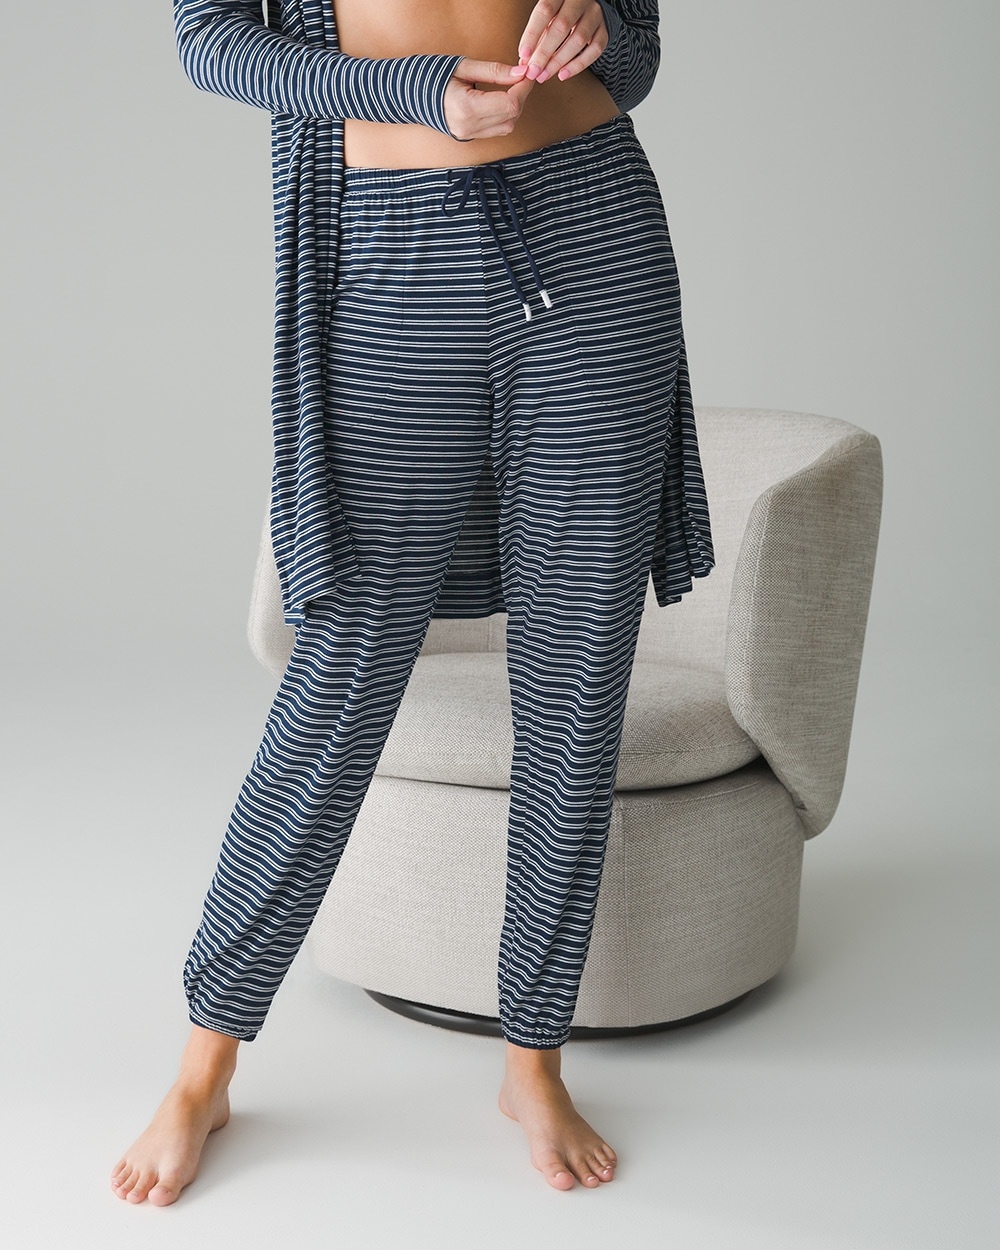 Cool Nights Relaxed Banded Ankle Pajama Pants